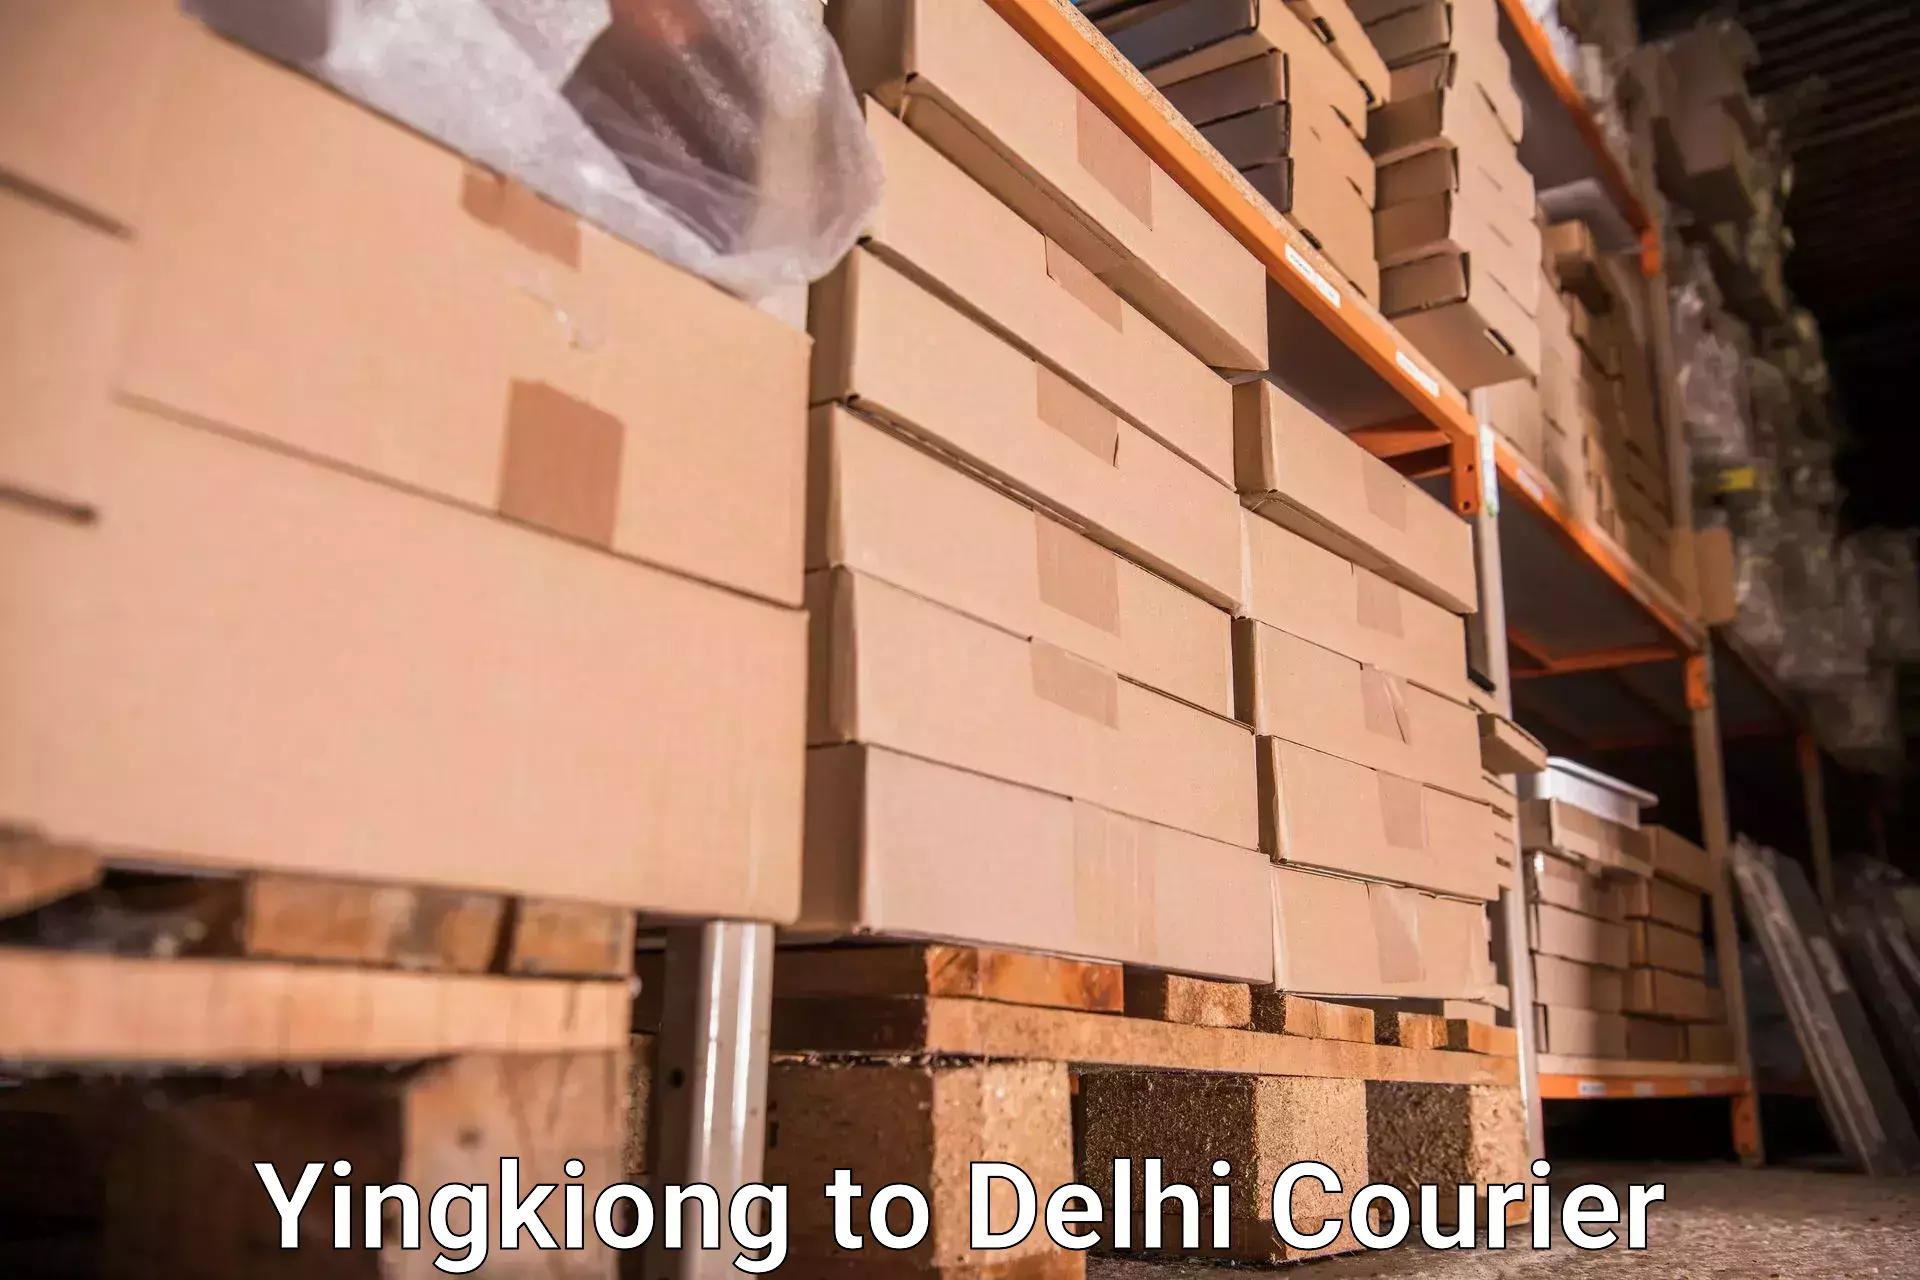 Luggage transfer service Yingkiong to East Delhi